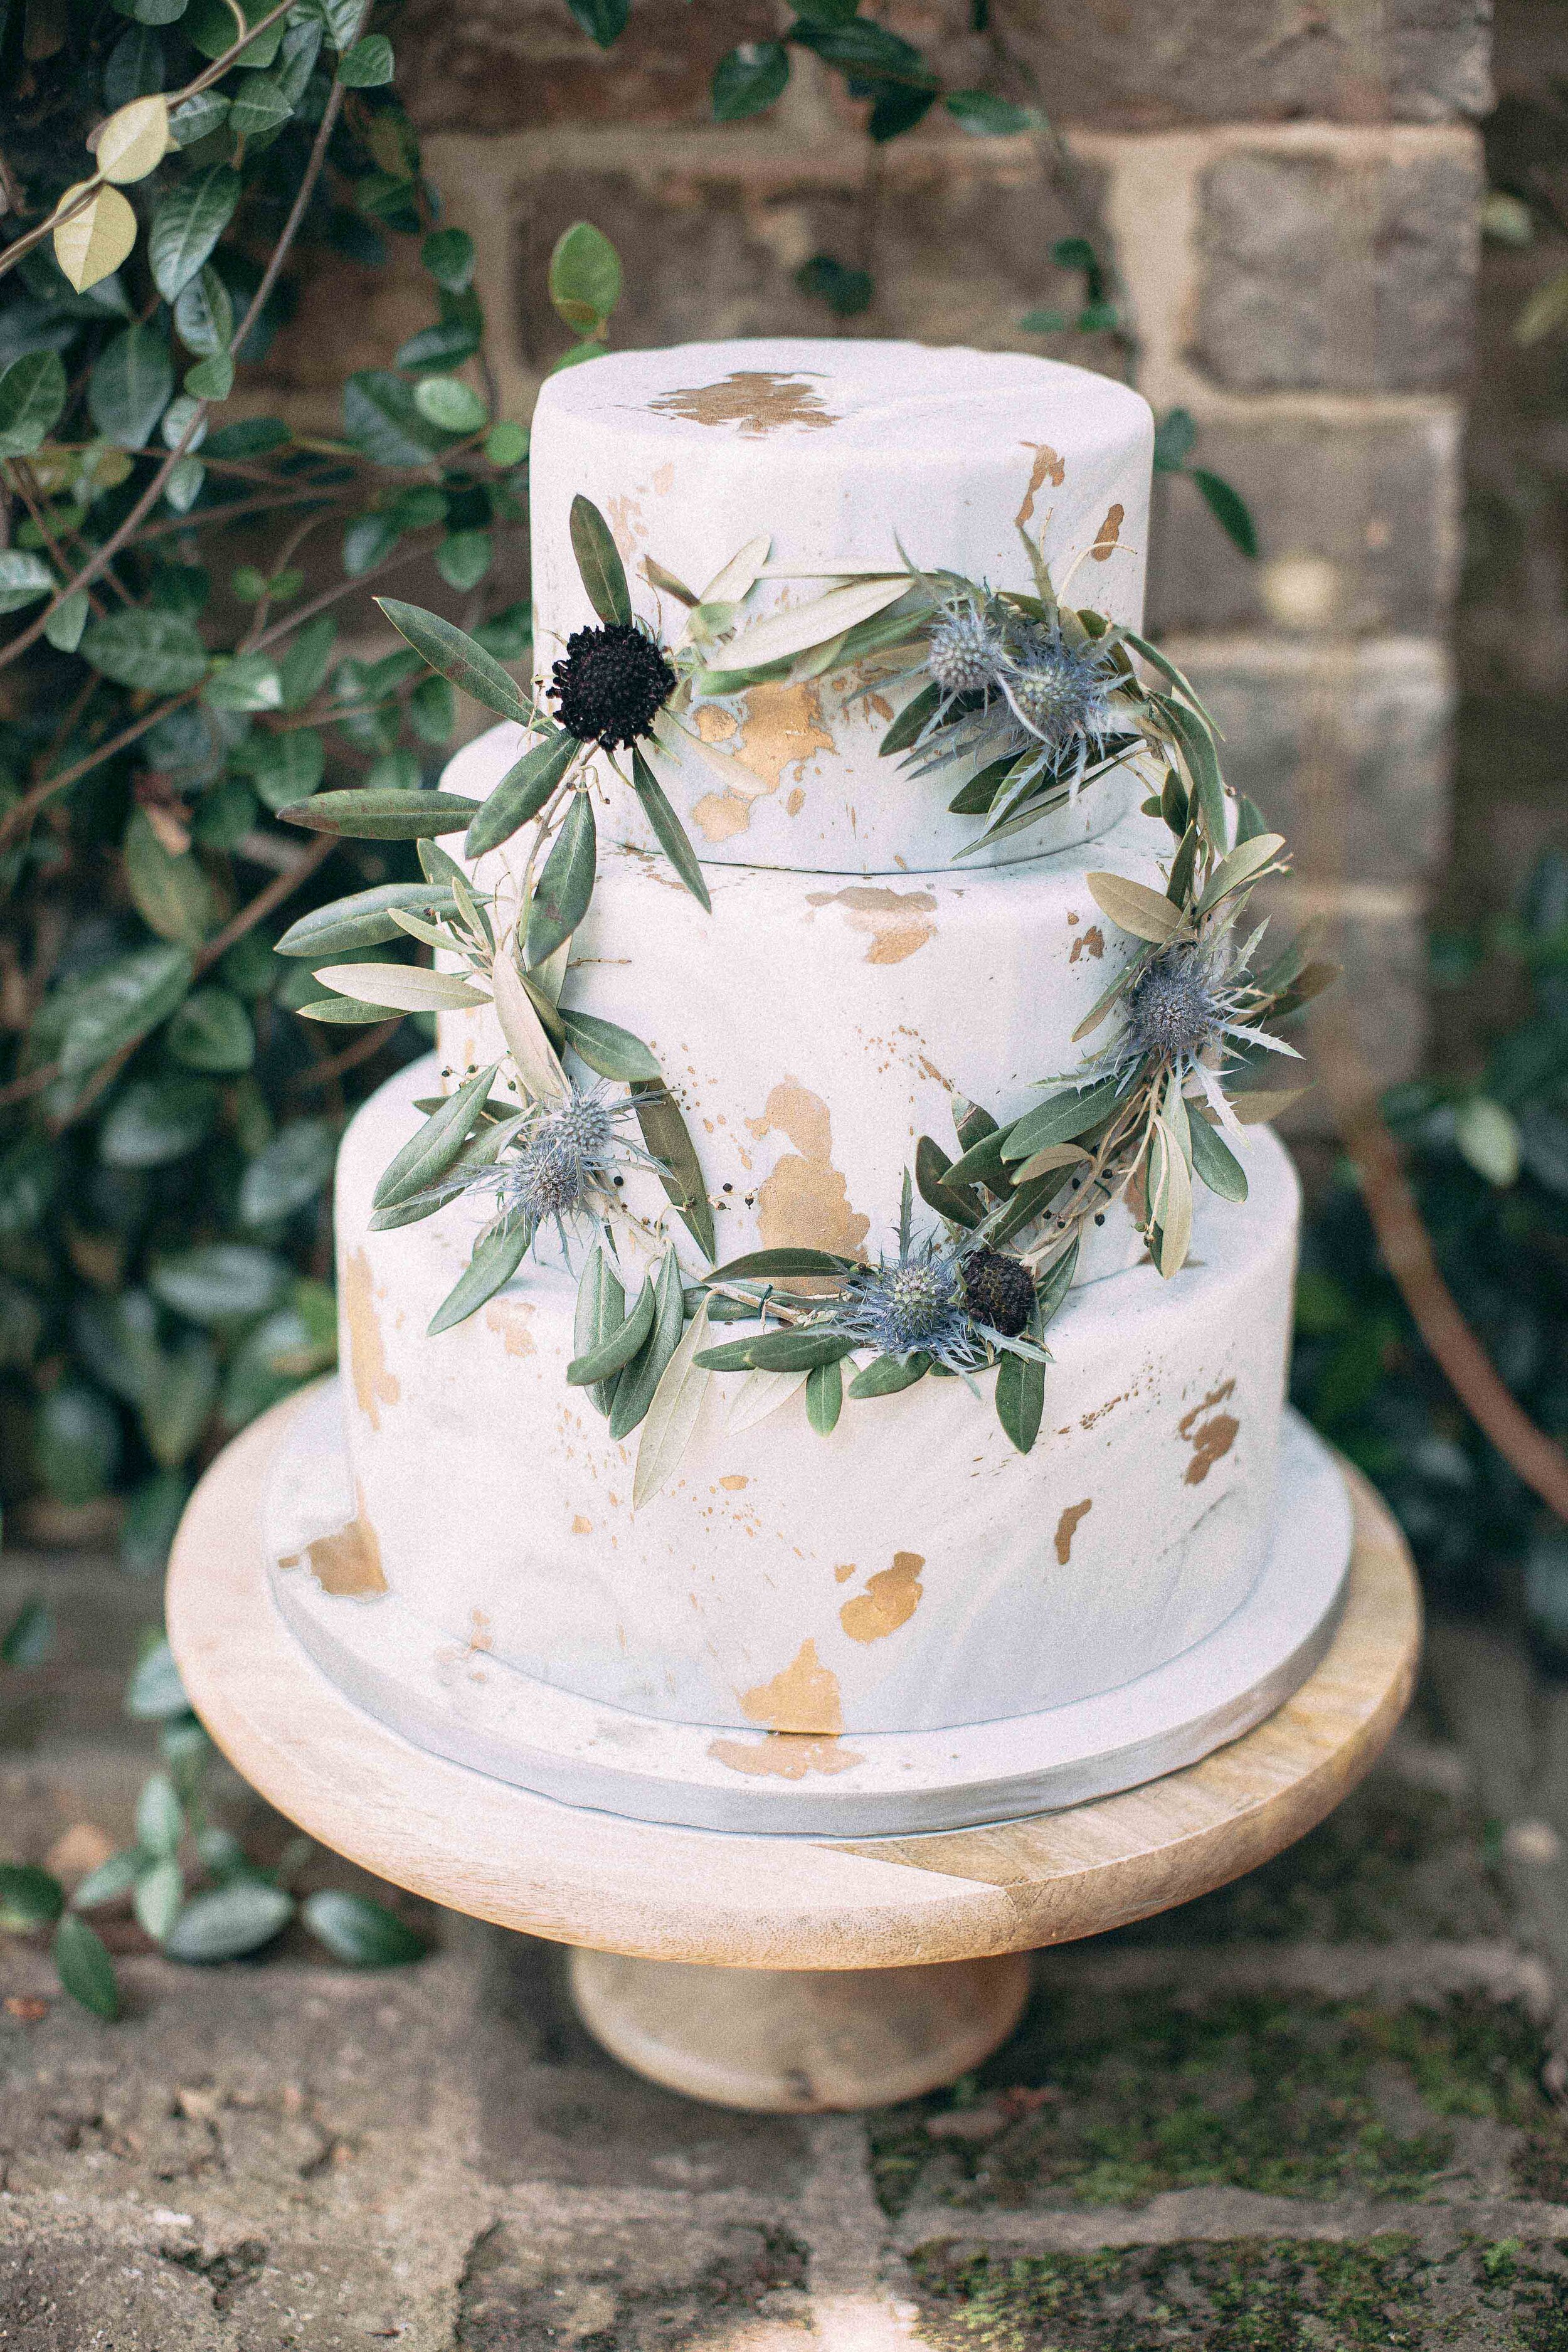 Vintage cake with watercolor and gold leave design adorned with natural greenery